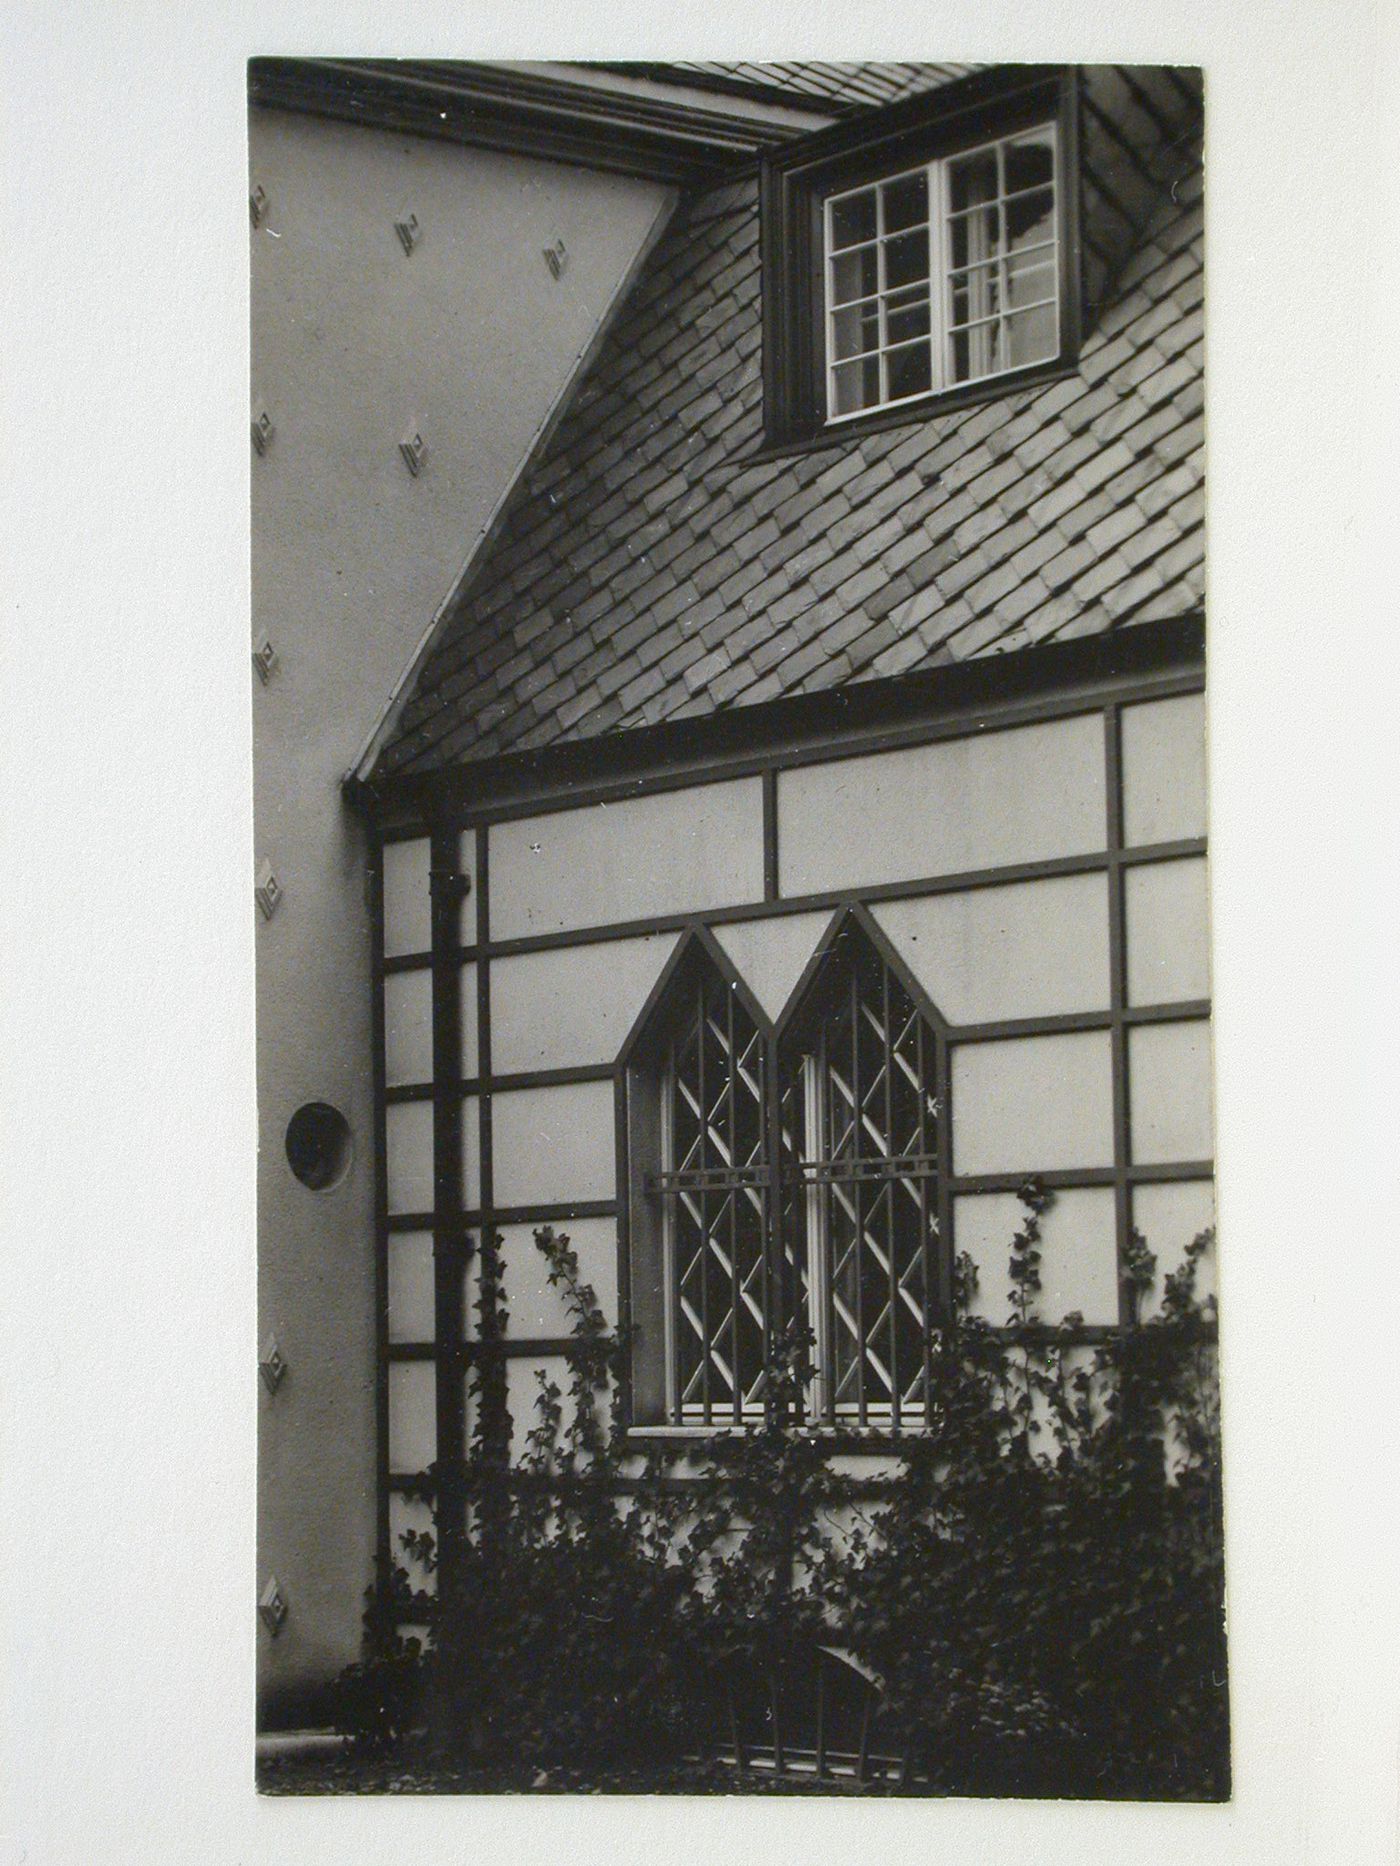 View of a window and dormer on the principal façade of the wing of Sonja Knips House, Nusswaldgasse 22, Vienna, Austria